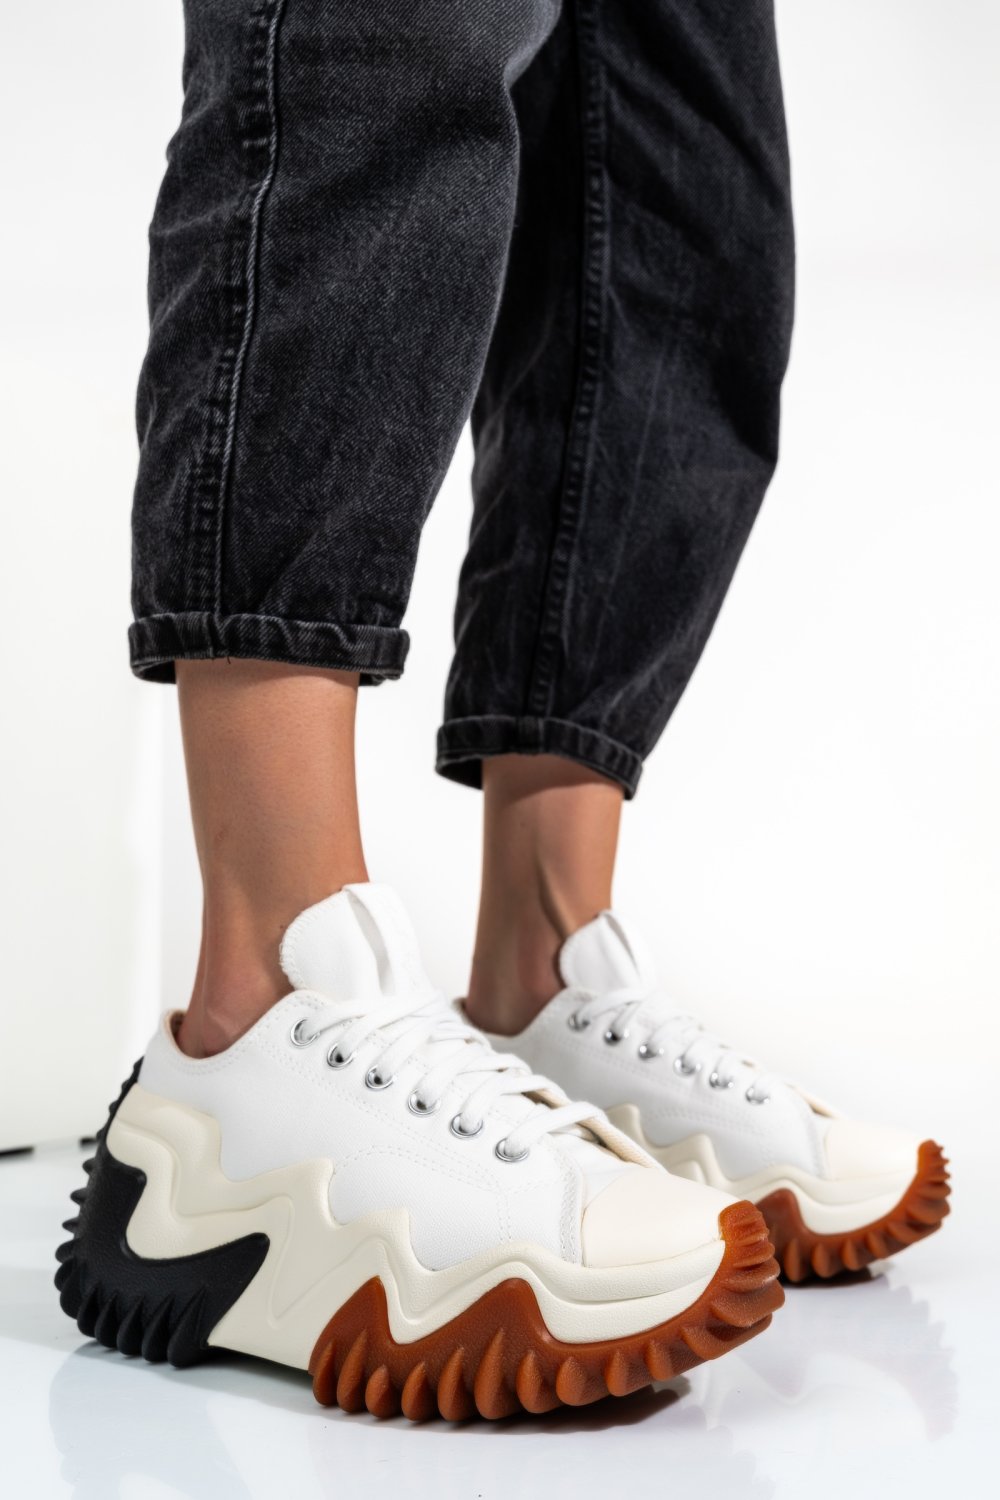 CONVERSE, SNEAKERS WHITE RUN STAR MOTION OX